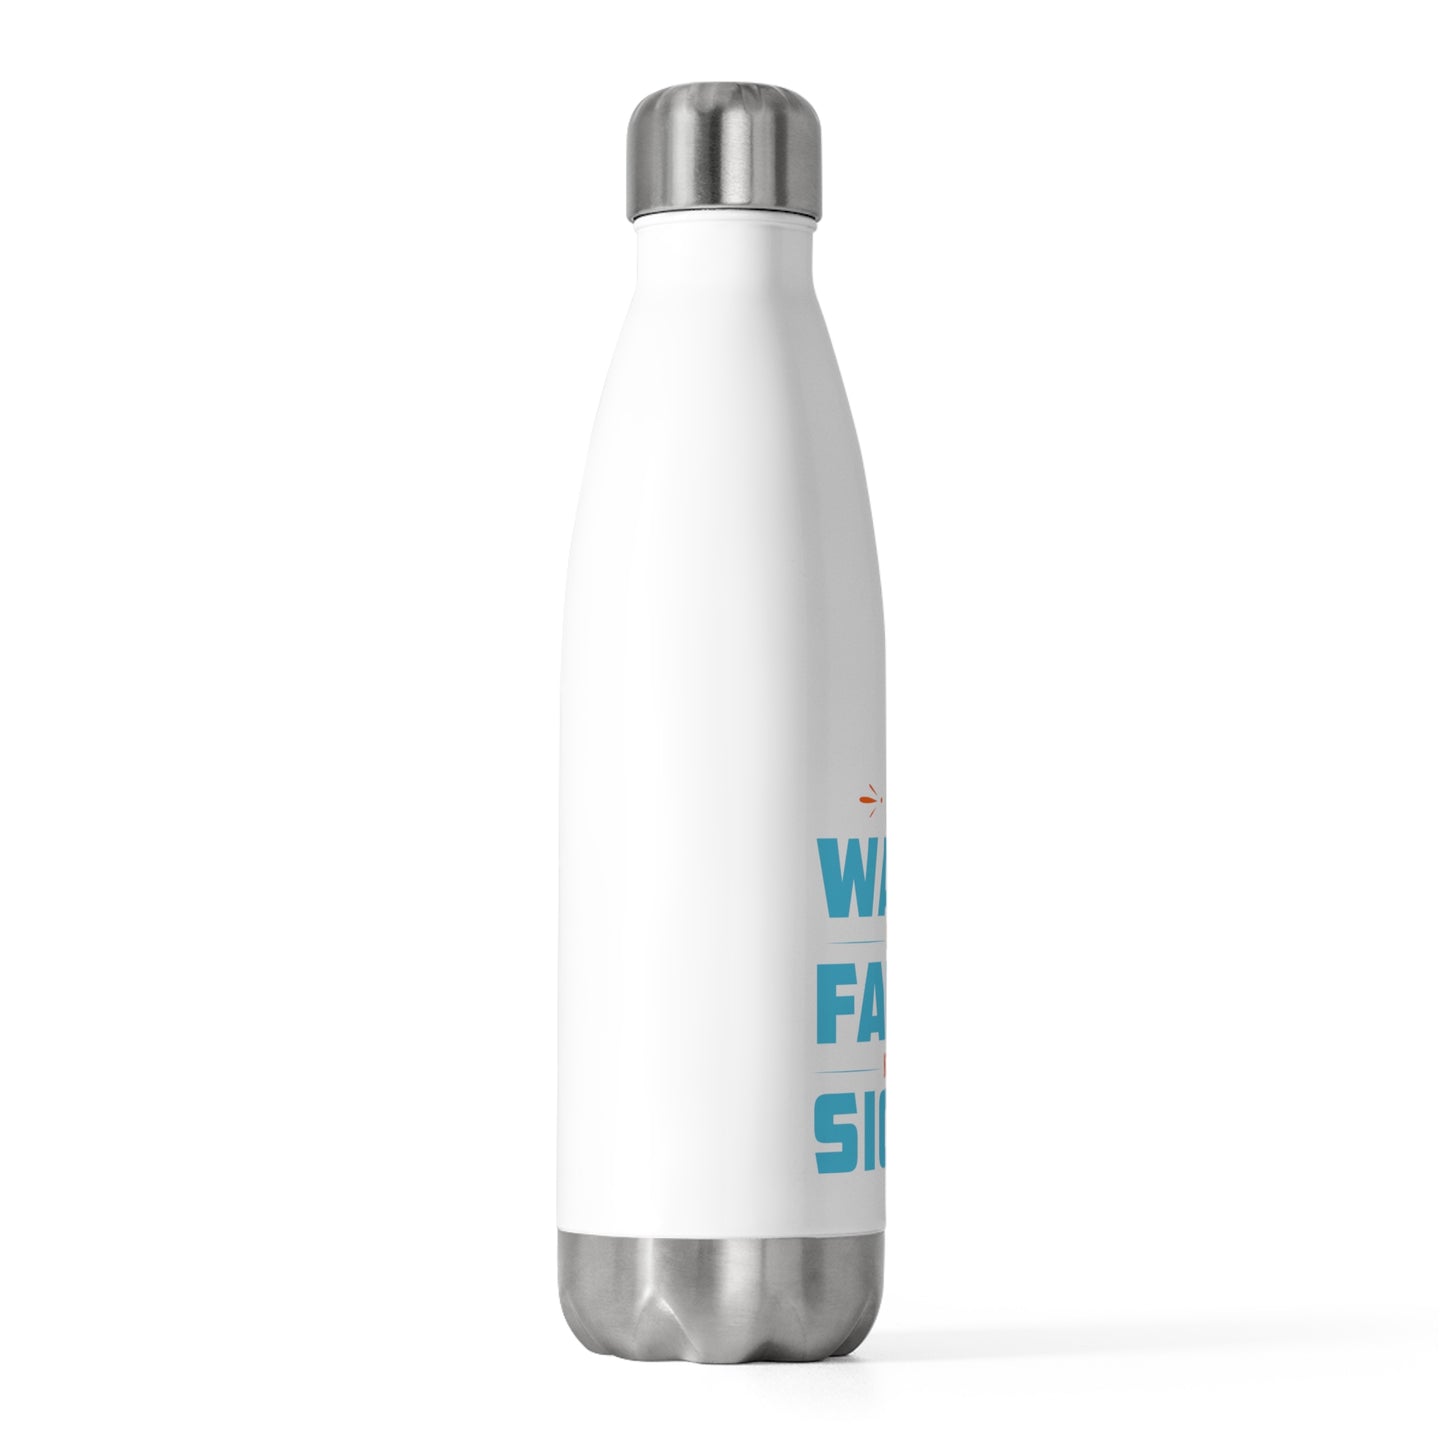 I Walk By Faith Not By Sight (2) Insulated Bottle 20 oz